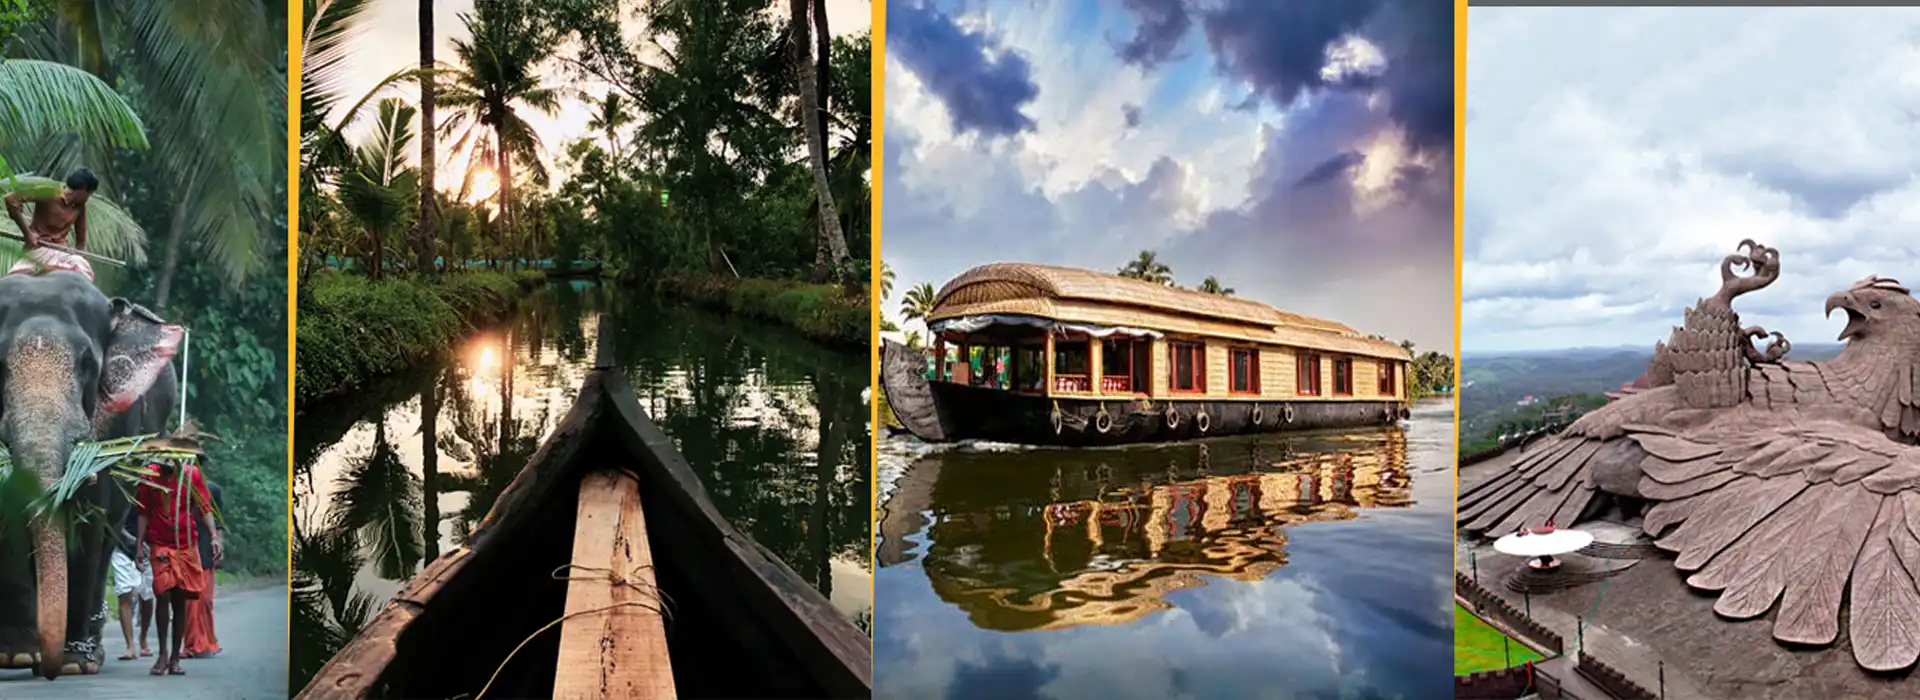 Kerala, God’s Own Country Tour Package